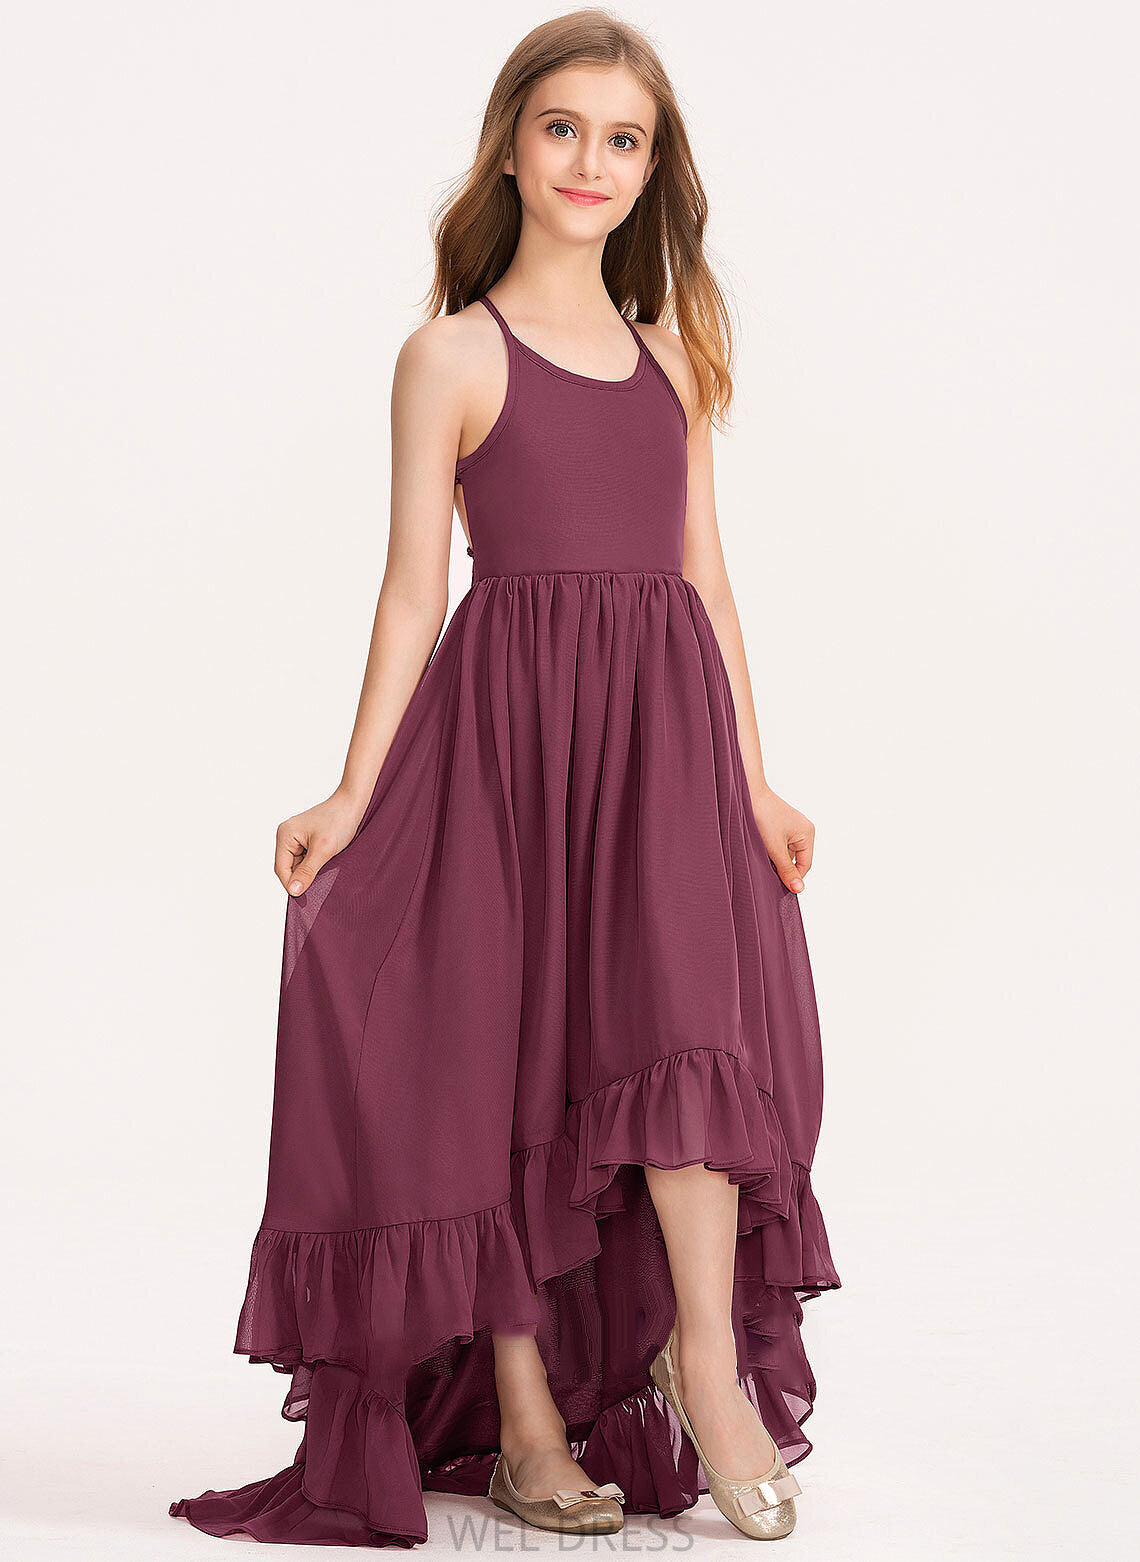 With A-Line Cascading Victoria Neck Junior Bridesmaid Dresses Chiffon Ruffles Scoop Asymmetrical Bow(s)